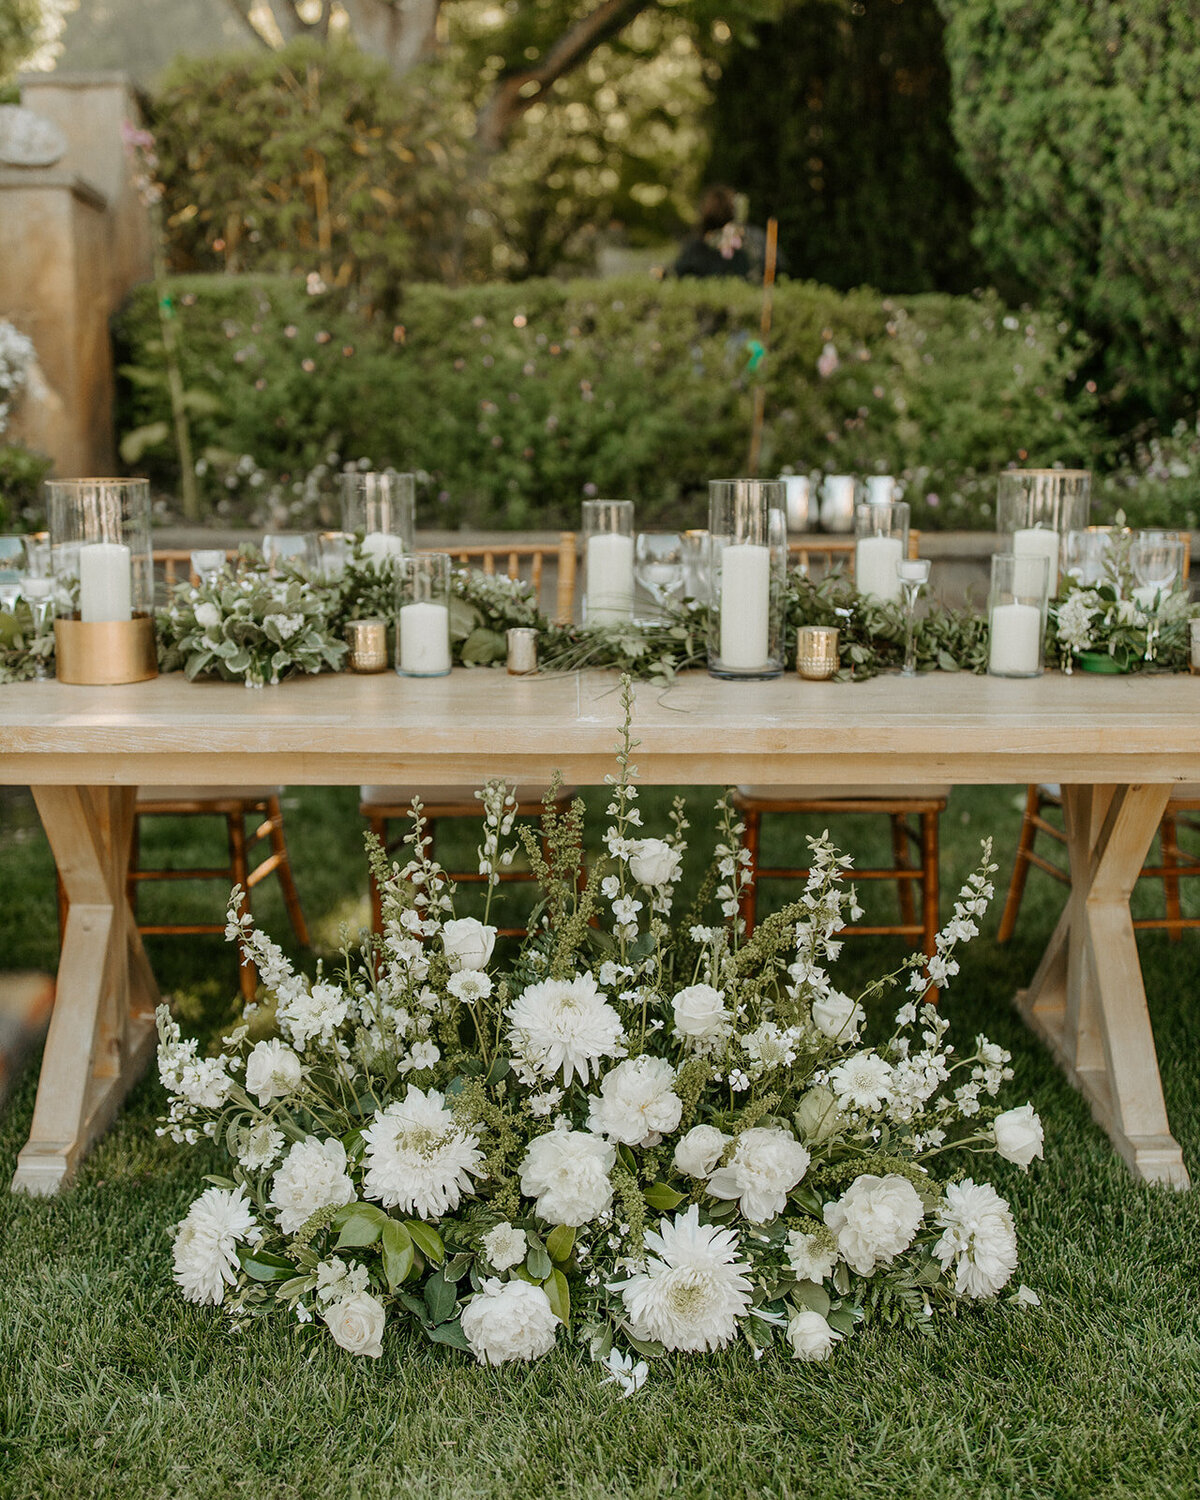 Farm Table with White Flowers